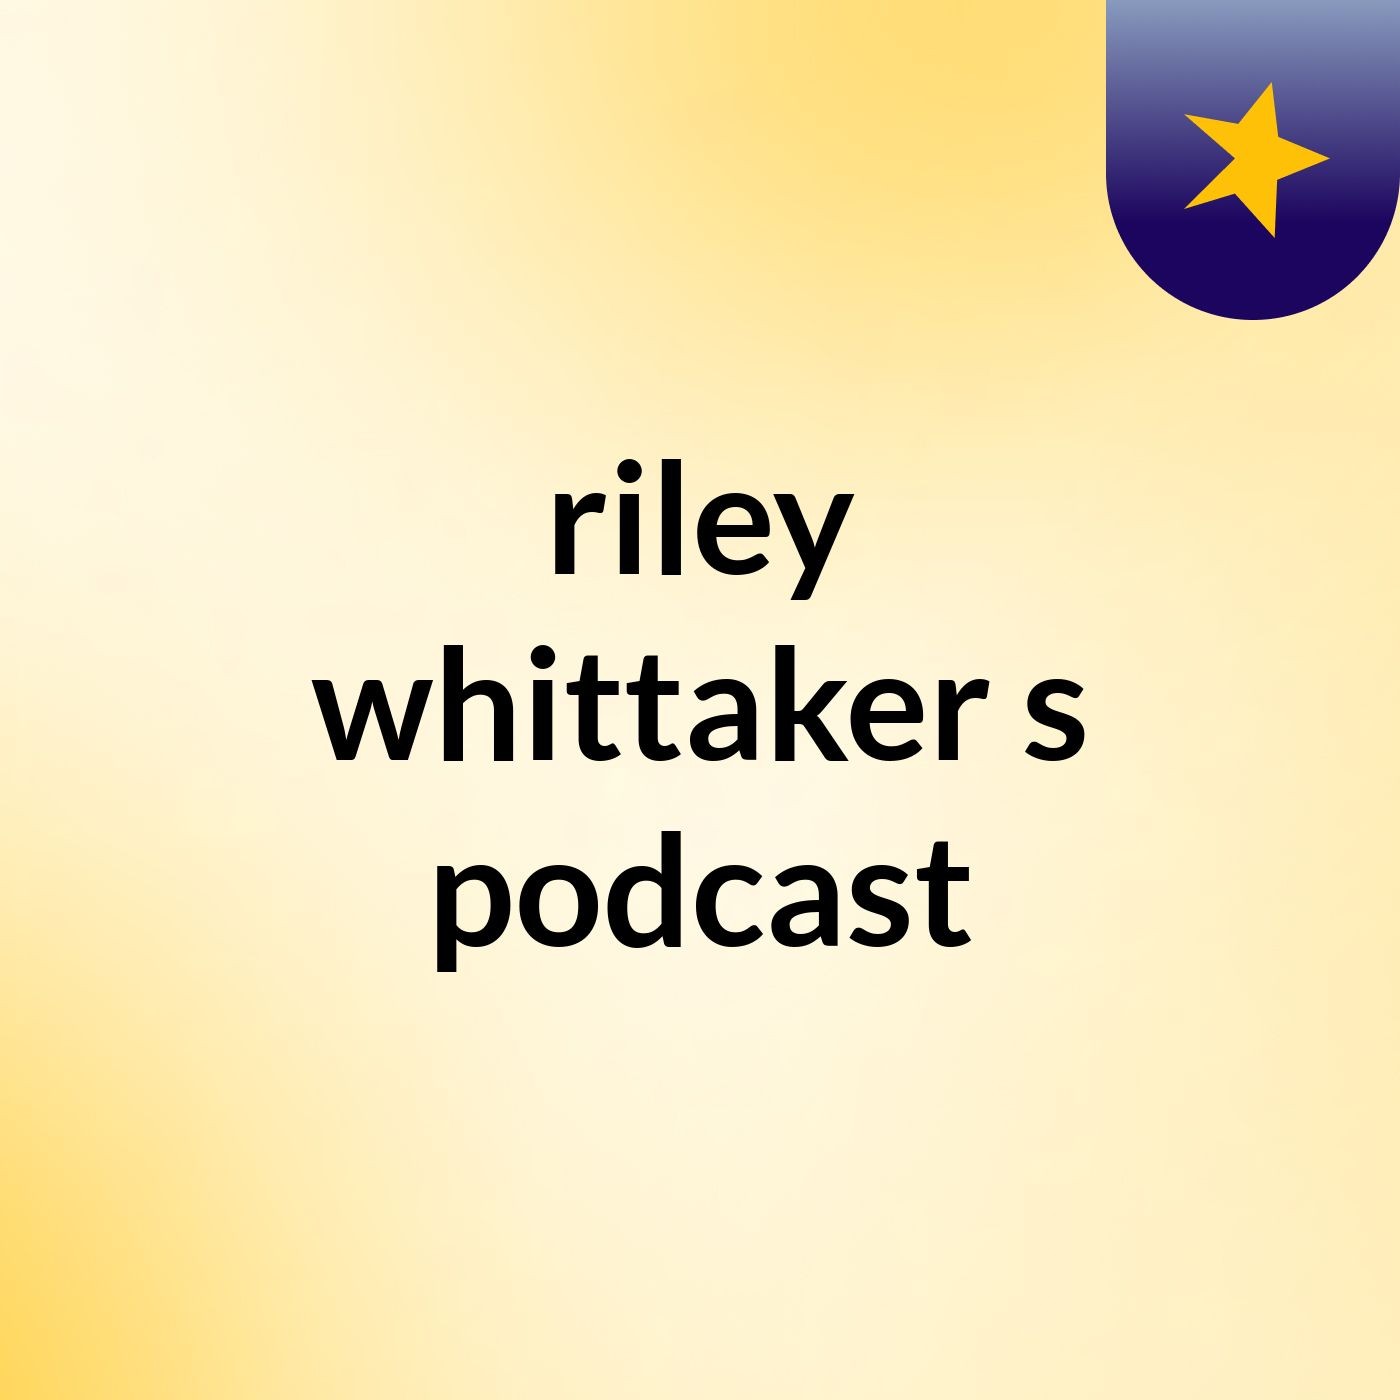 riley whittaker's podcast